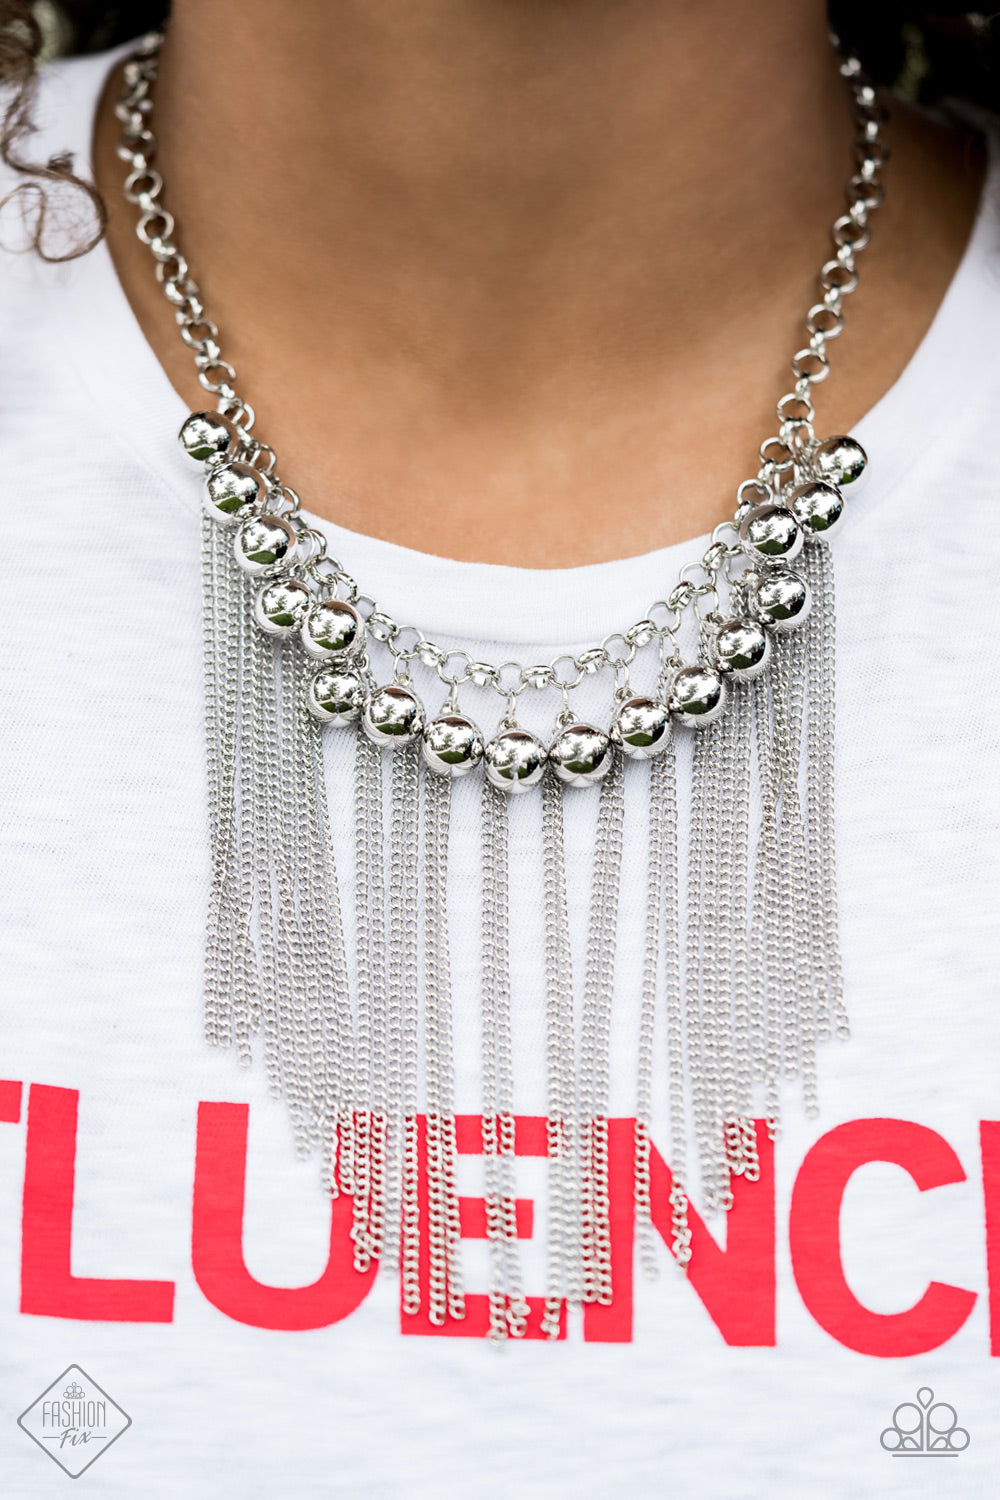 $5 Jewelry with Ashley Swint Paparazzi Powerhouse Prowl - Silver Necklace & Earrings - Fashion Fix / Trend Blend Exclusive August 2019